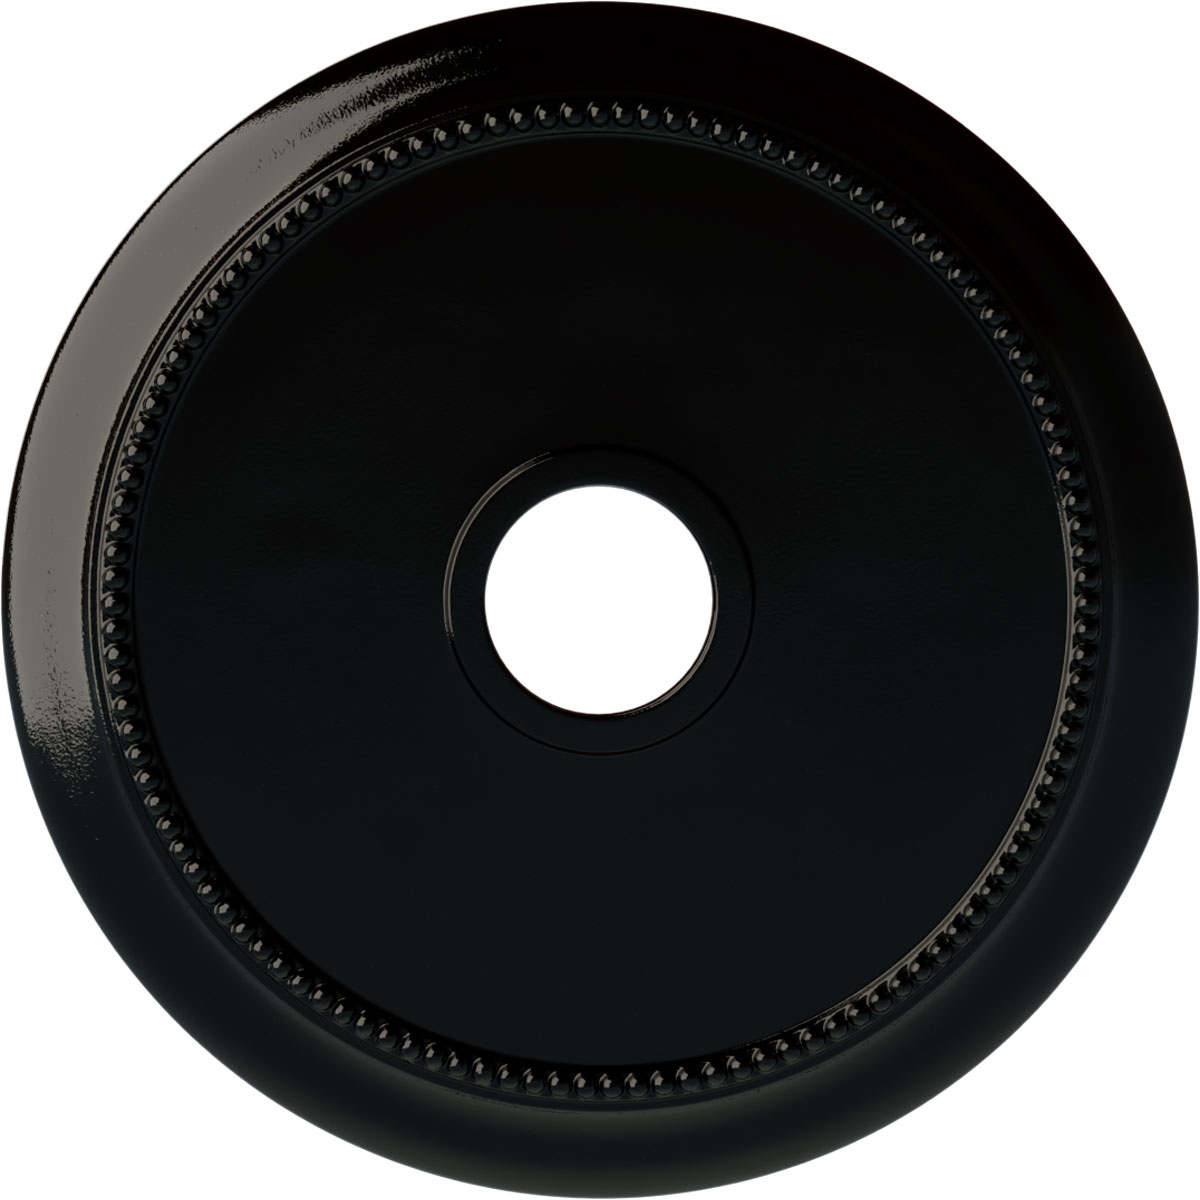 Ekena Millwork 24 1/8"OD x 4 3/8"ID x 2 1/4"P Crendon Ceiling Medallion (Fits Canopies up to 4 3/8"), Hand-Painted Black Pearl - image 1 of 4